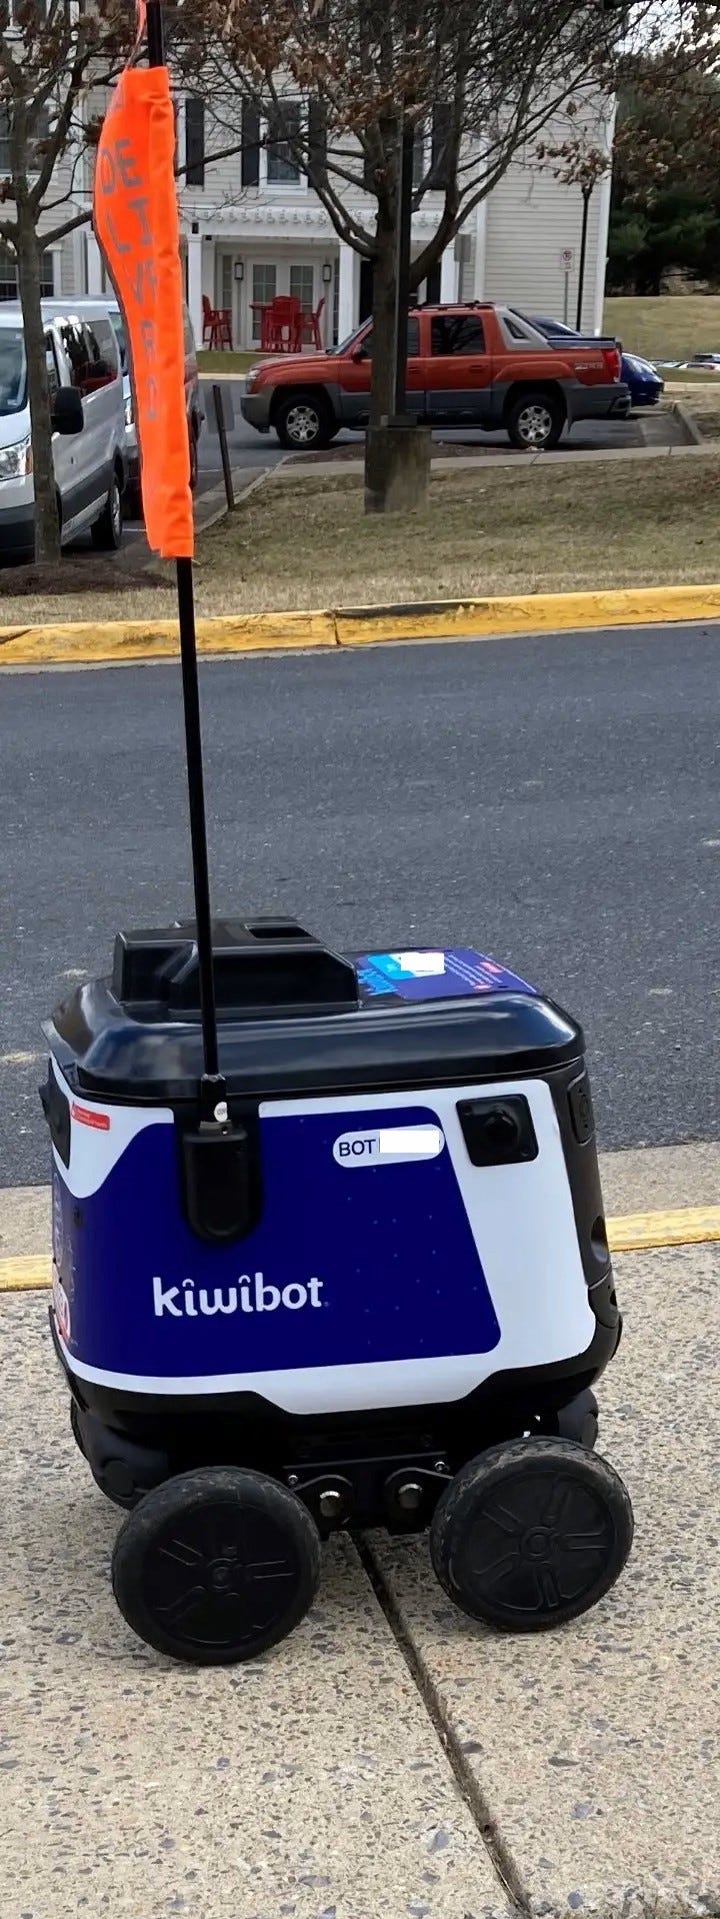 Kiwi Robots are Taking Over the Campus!!! | by Yohan J. | Medium